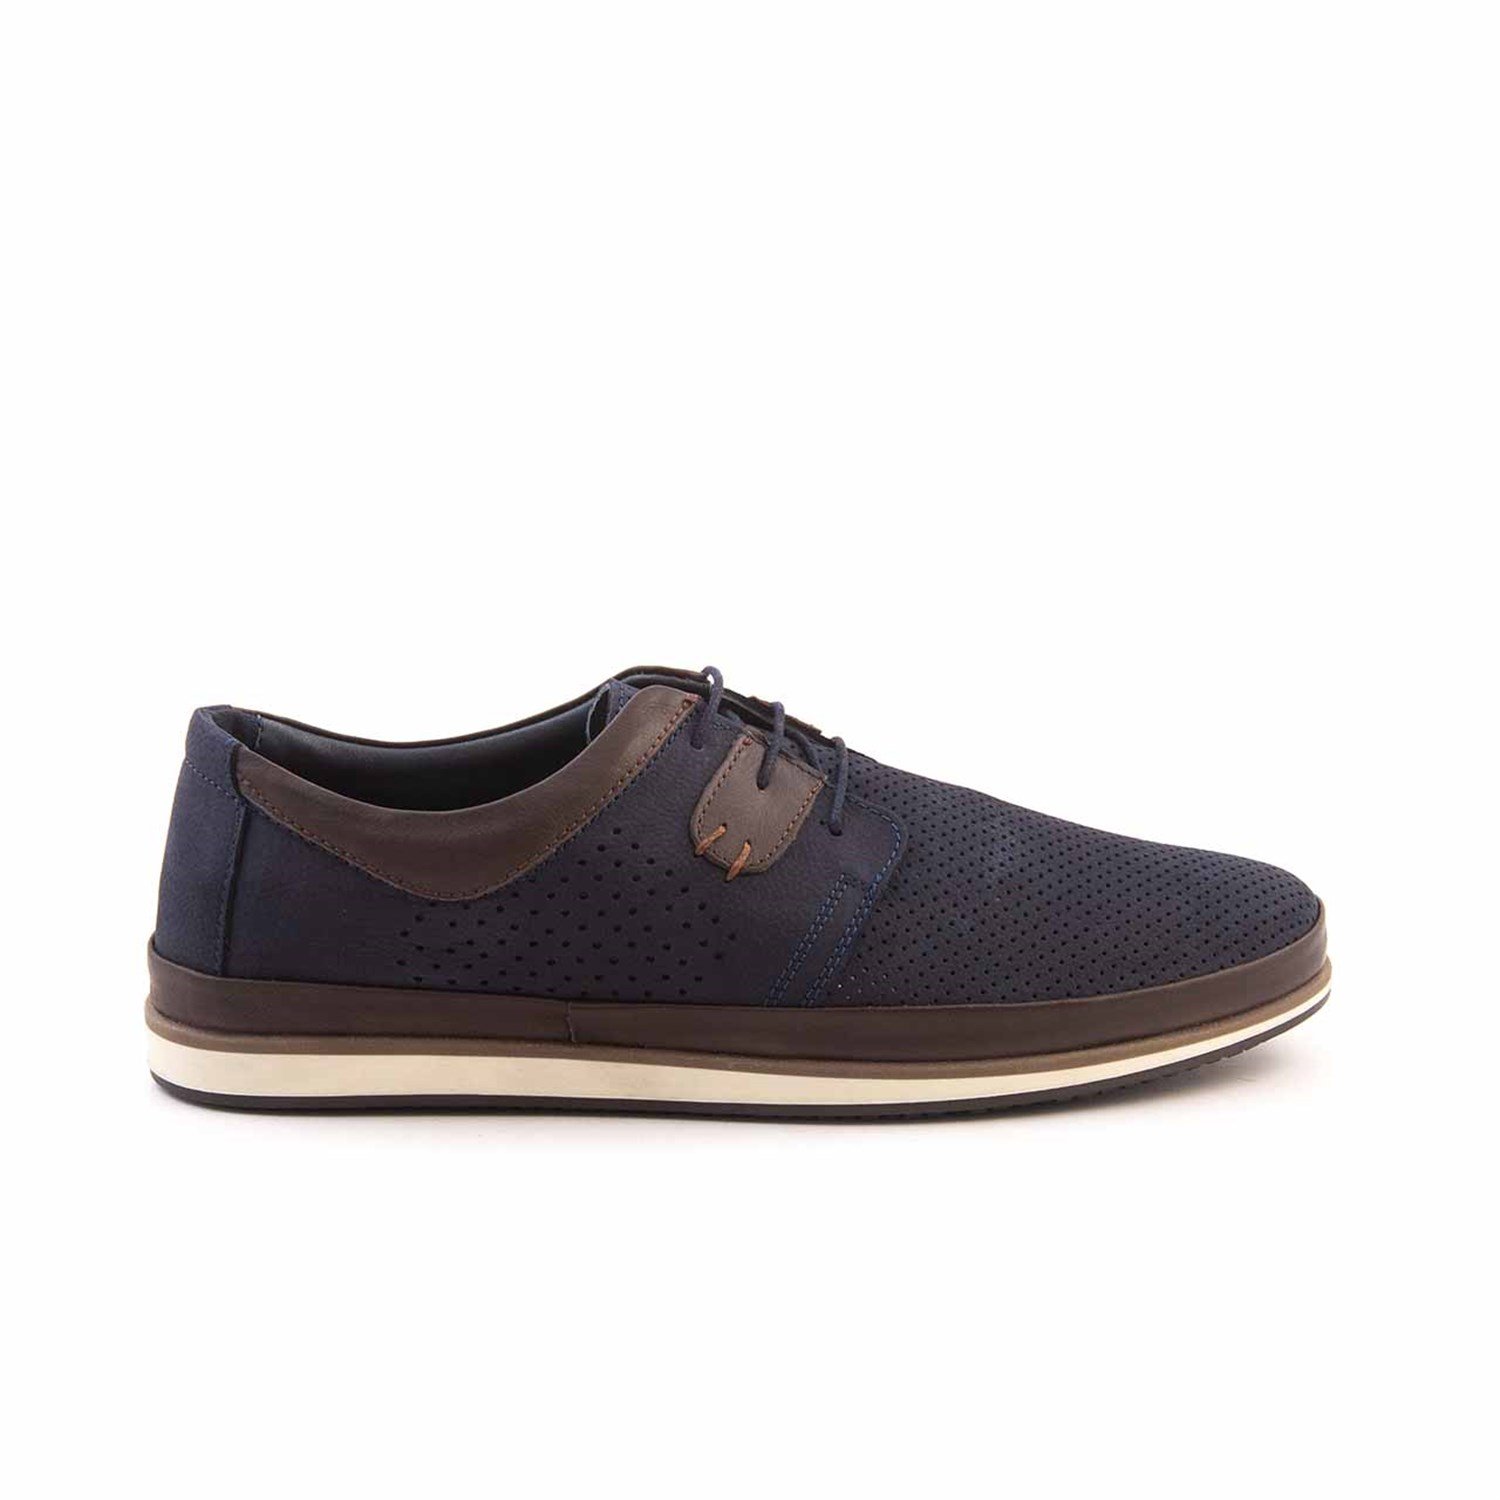 Kemal Tanca Leather Men's Casual Shoes